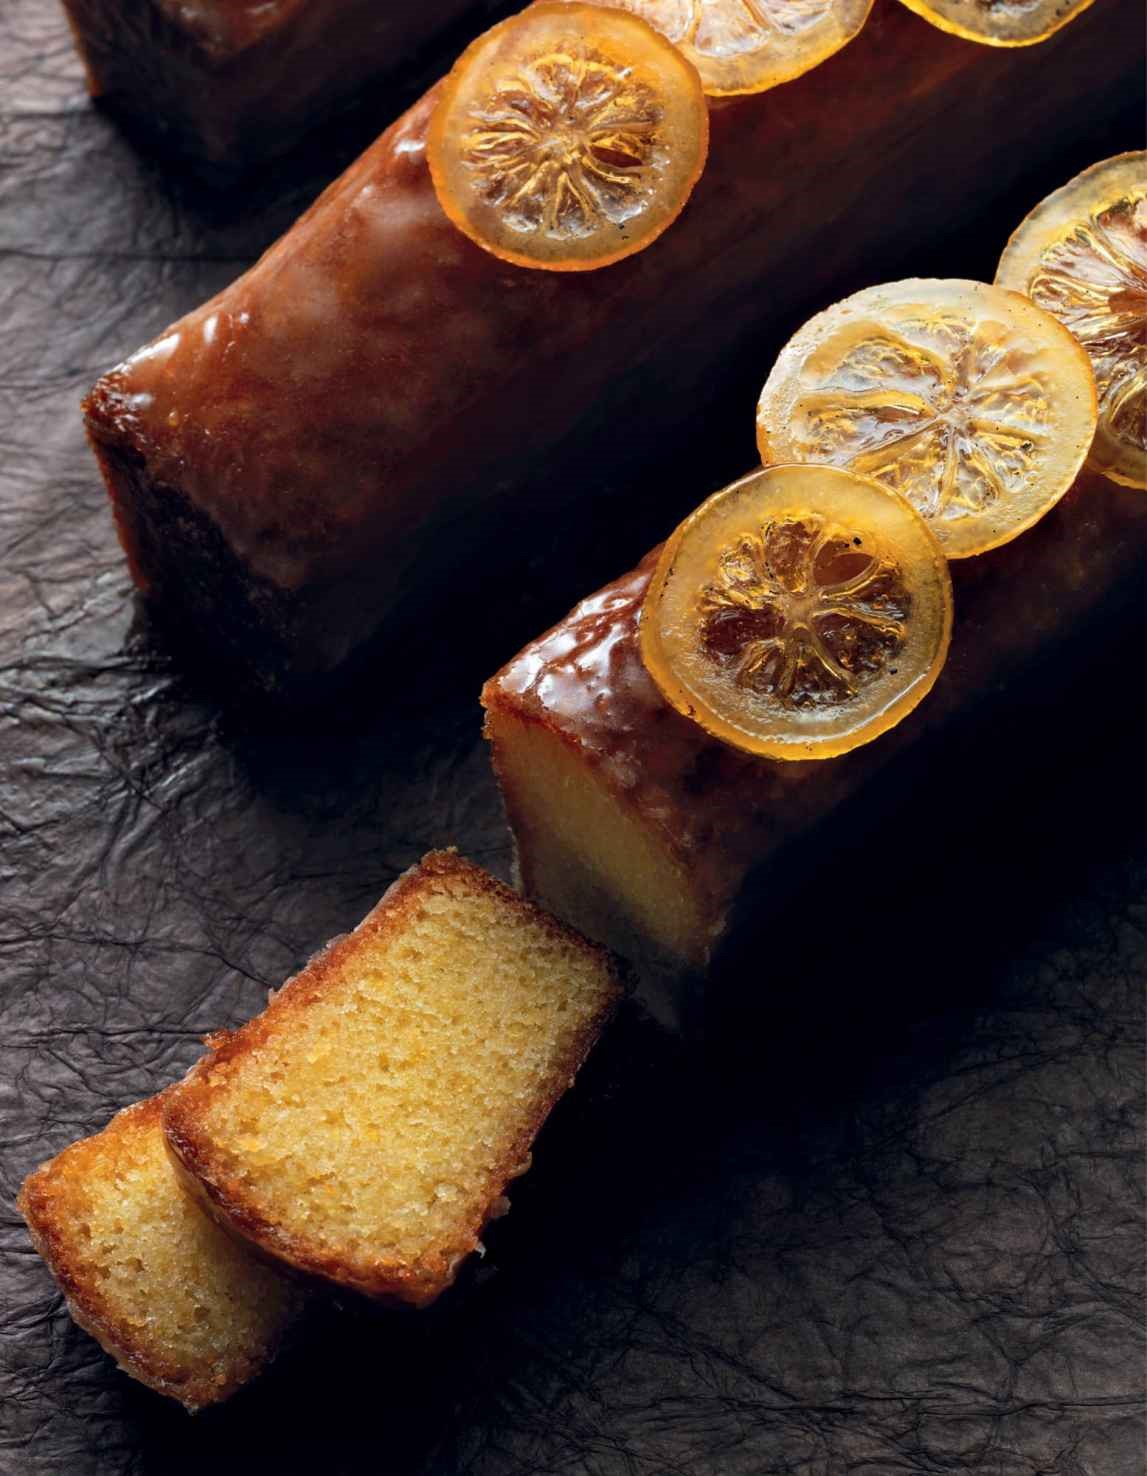 Lemon Drizzle Cake Recipe by William Curley cut